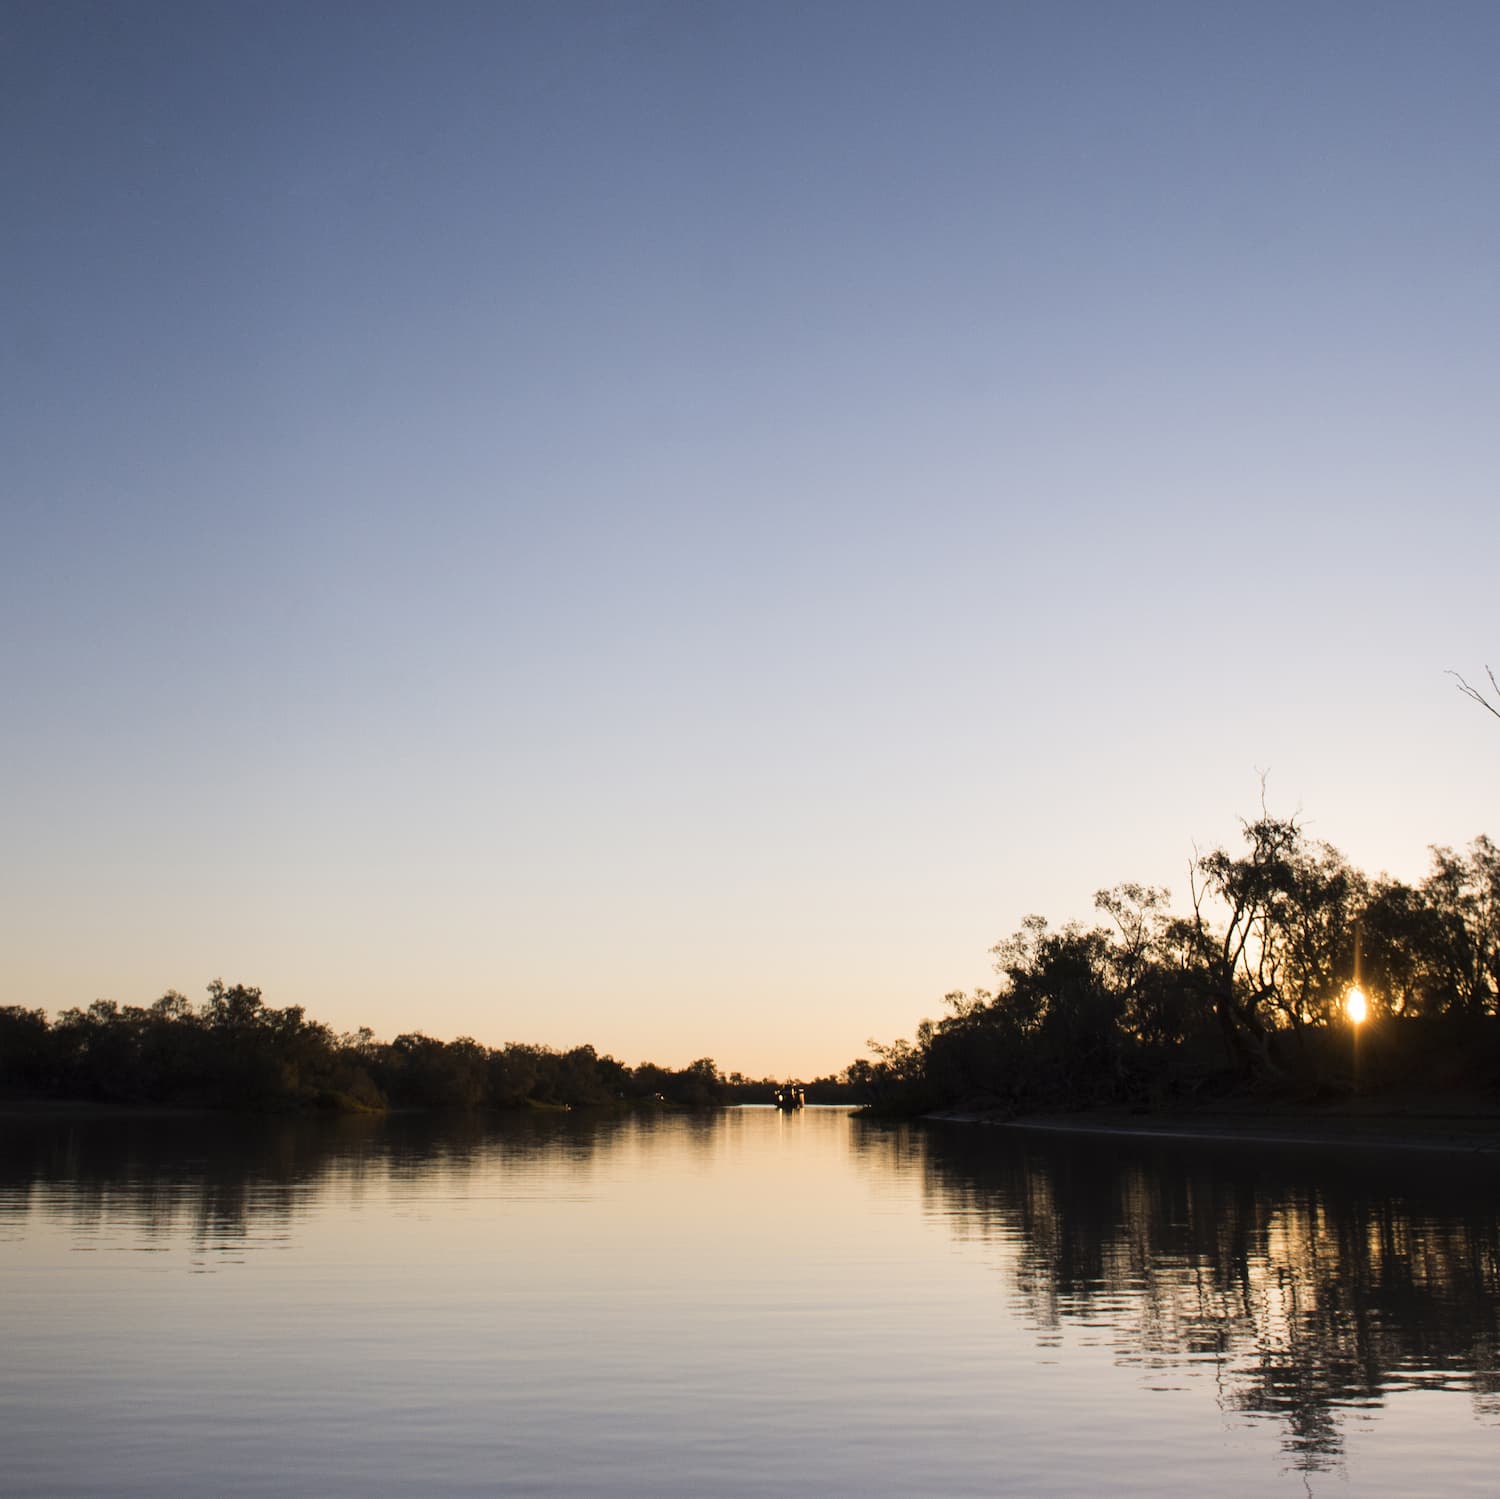 Expansive view of the Thomson River at dusk. Thomson Belle Paddlewheeler visible in the far distance